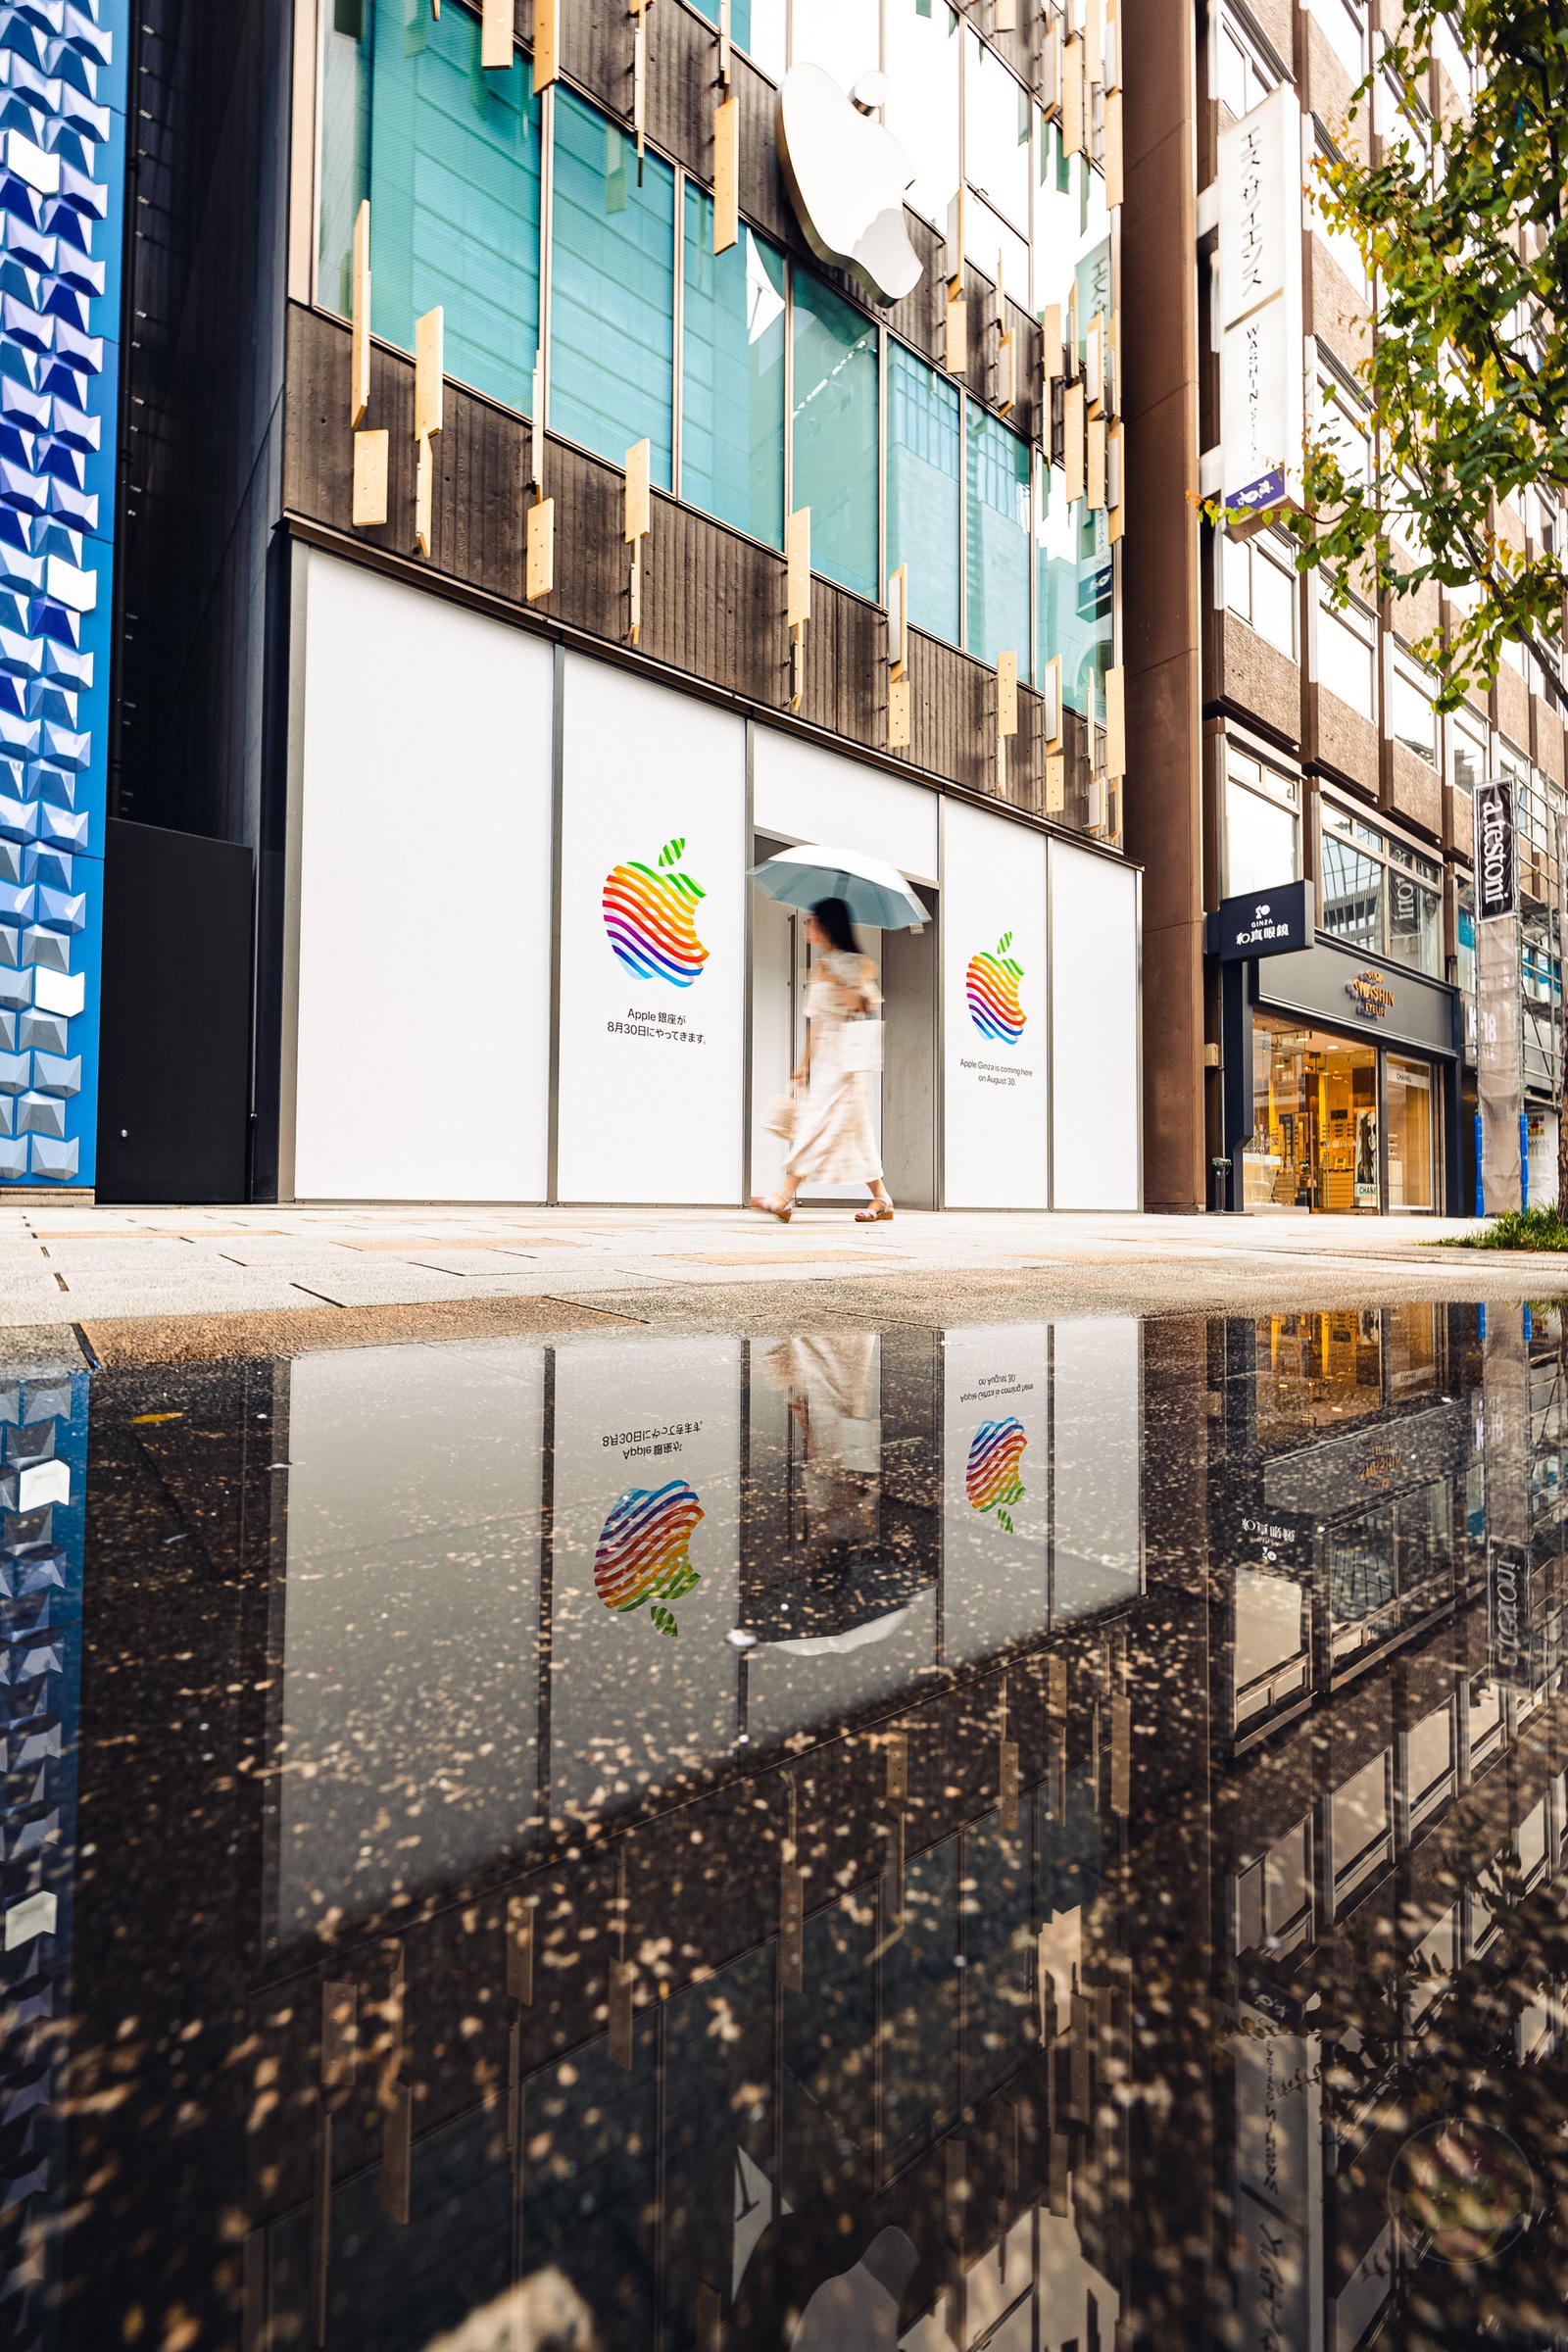 Apple-Ginza-Temporary-Store-at-Ginza-8th-street-02.jpg